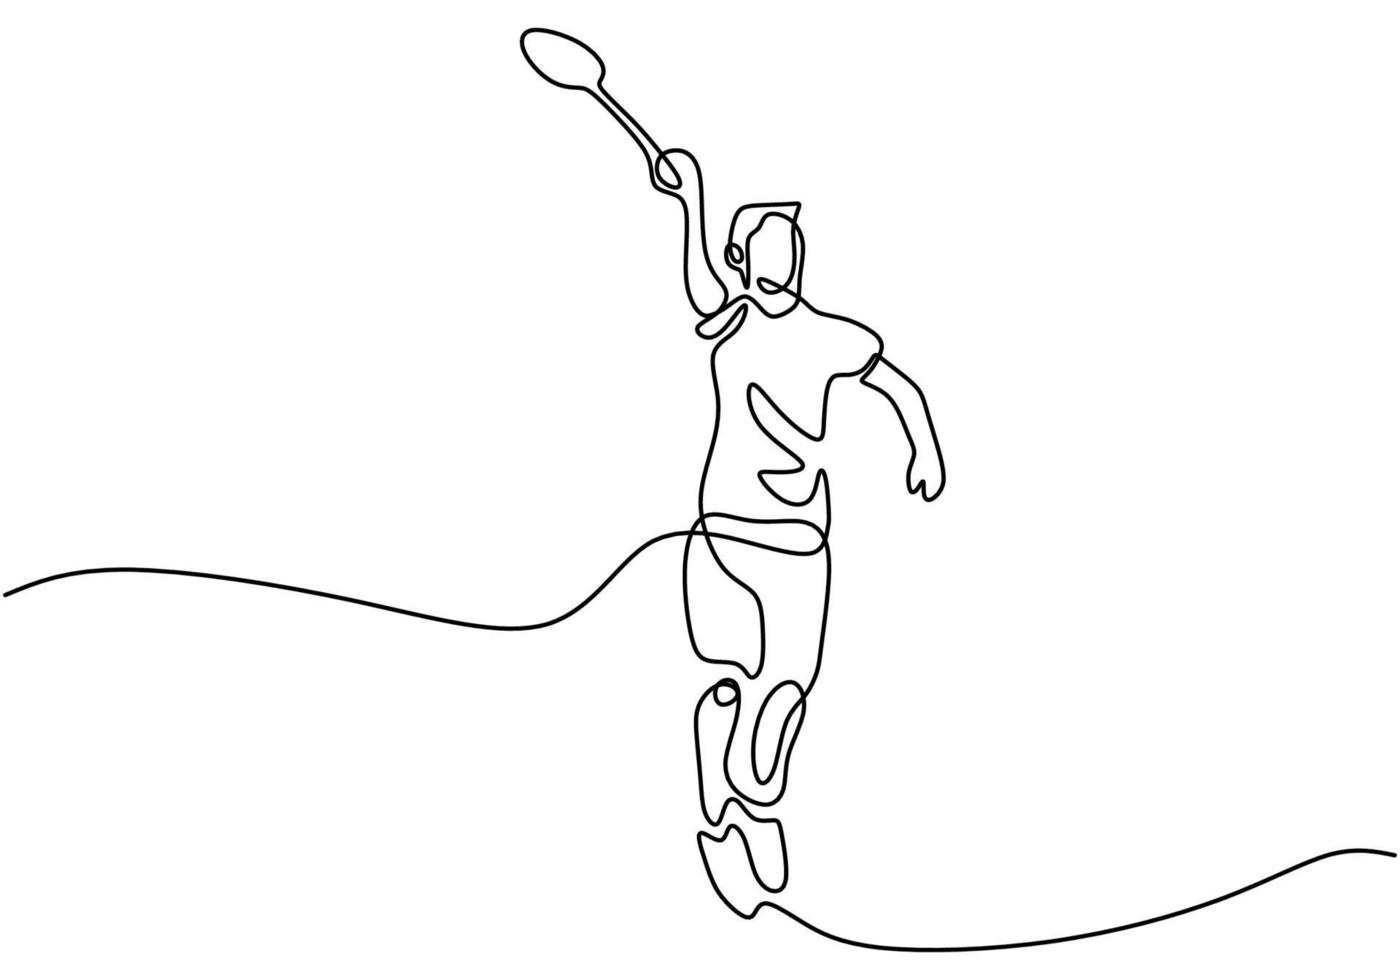 Continuous line drawing of man playing badminton. Character a badminton player is playing with a racket isolated on white background. Sport tournament concept minimalist design. Vector illustration